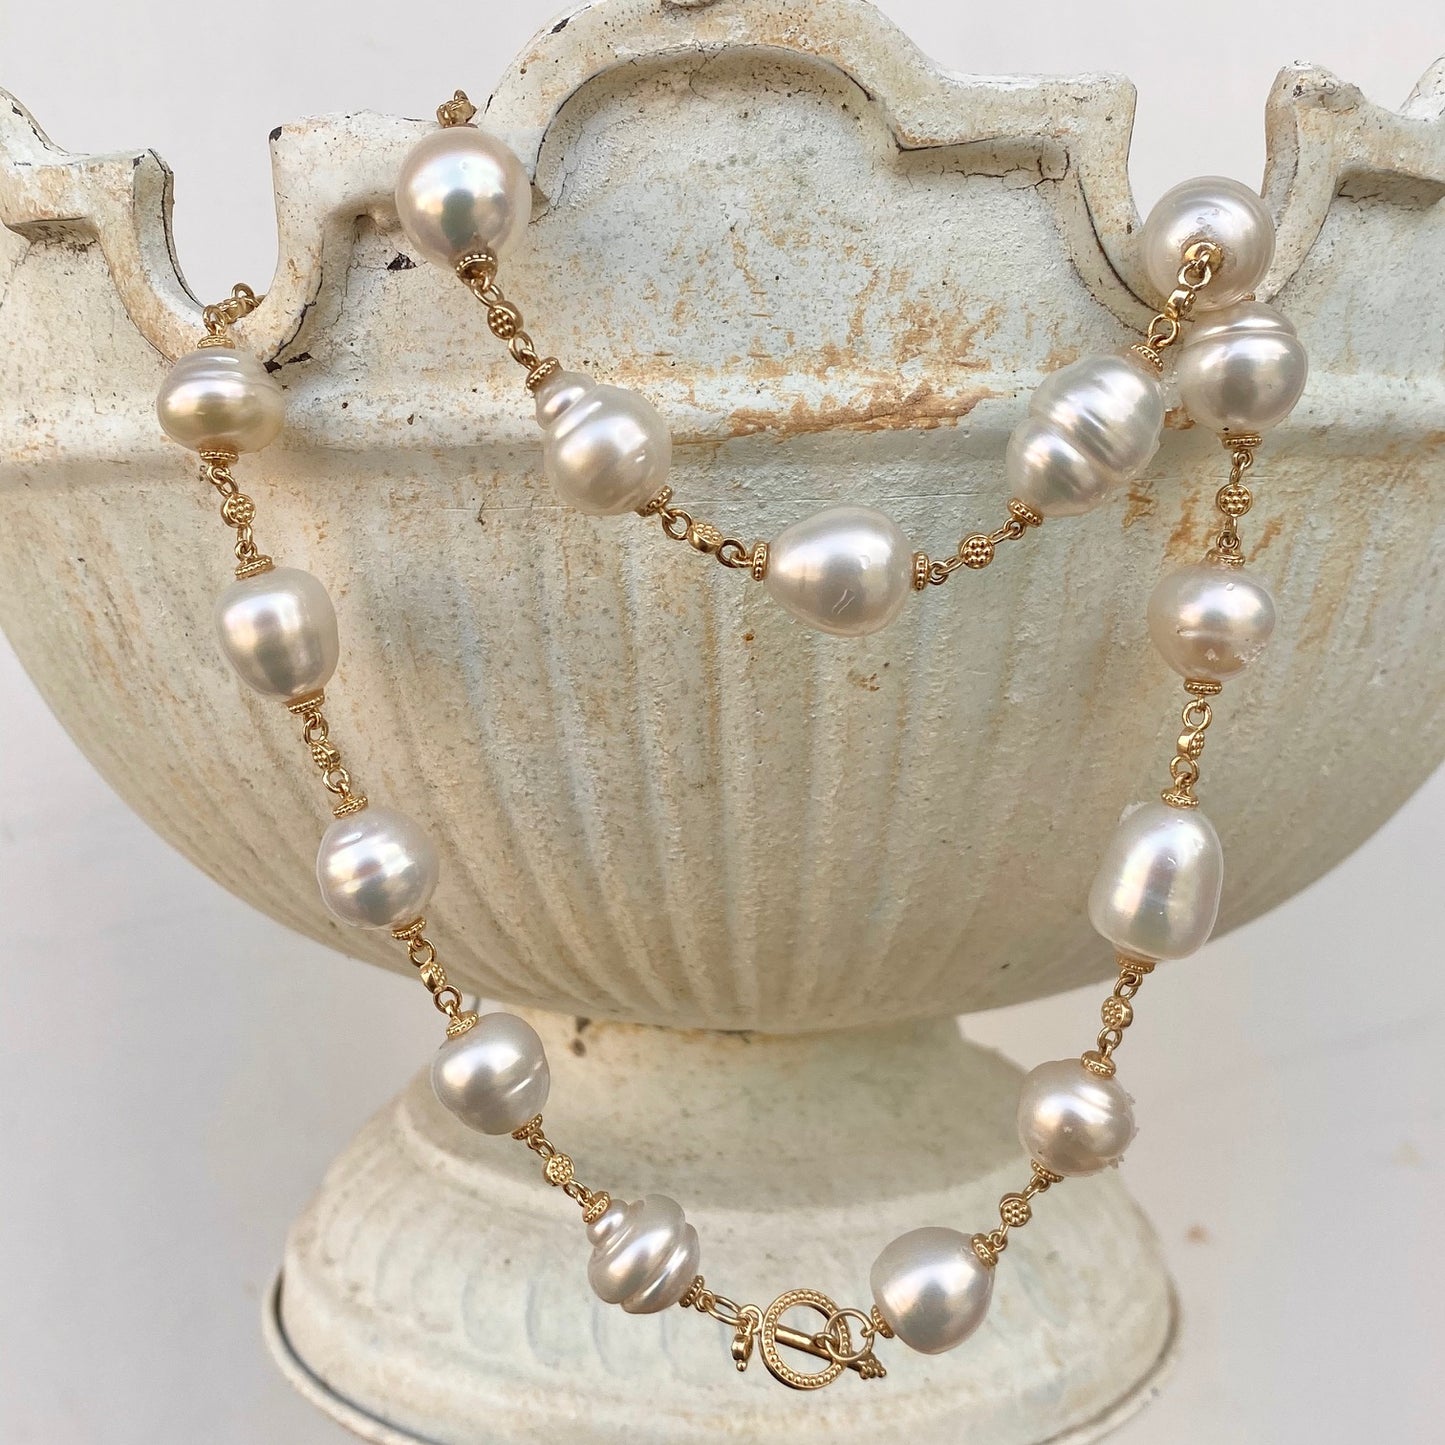 14KT Yellow Gold Paspaley South Sea Pearl Toggle Station Necklace 20", 14KT Yellow Gold Paspaley South Sea Pearl Toggle Station Necklace 20" - Legacy Saint Jewelry